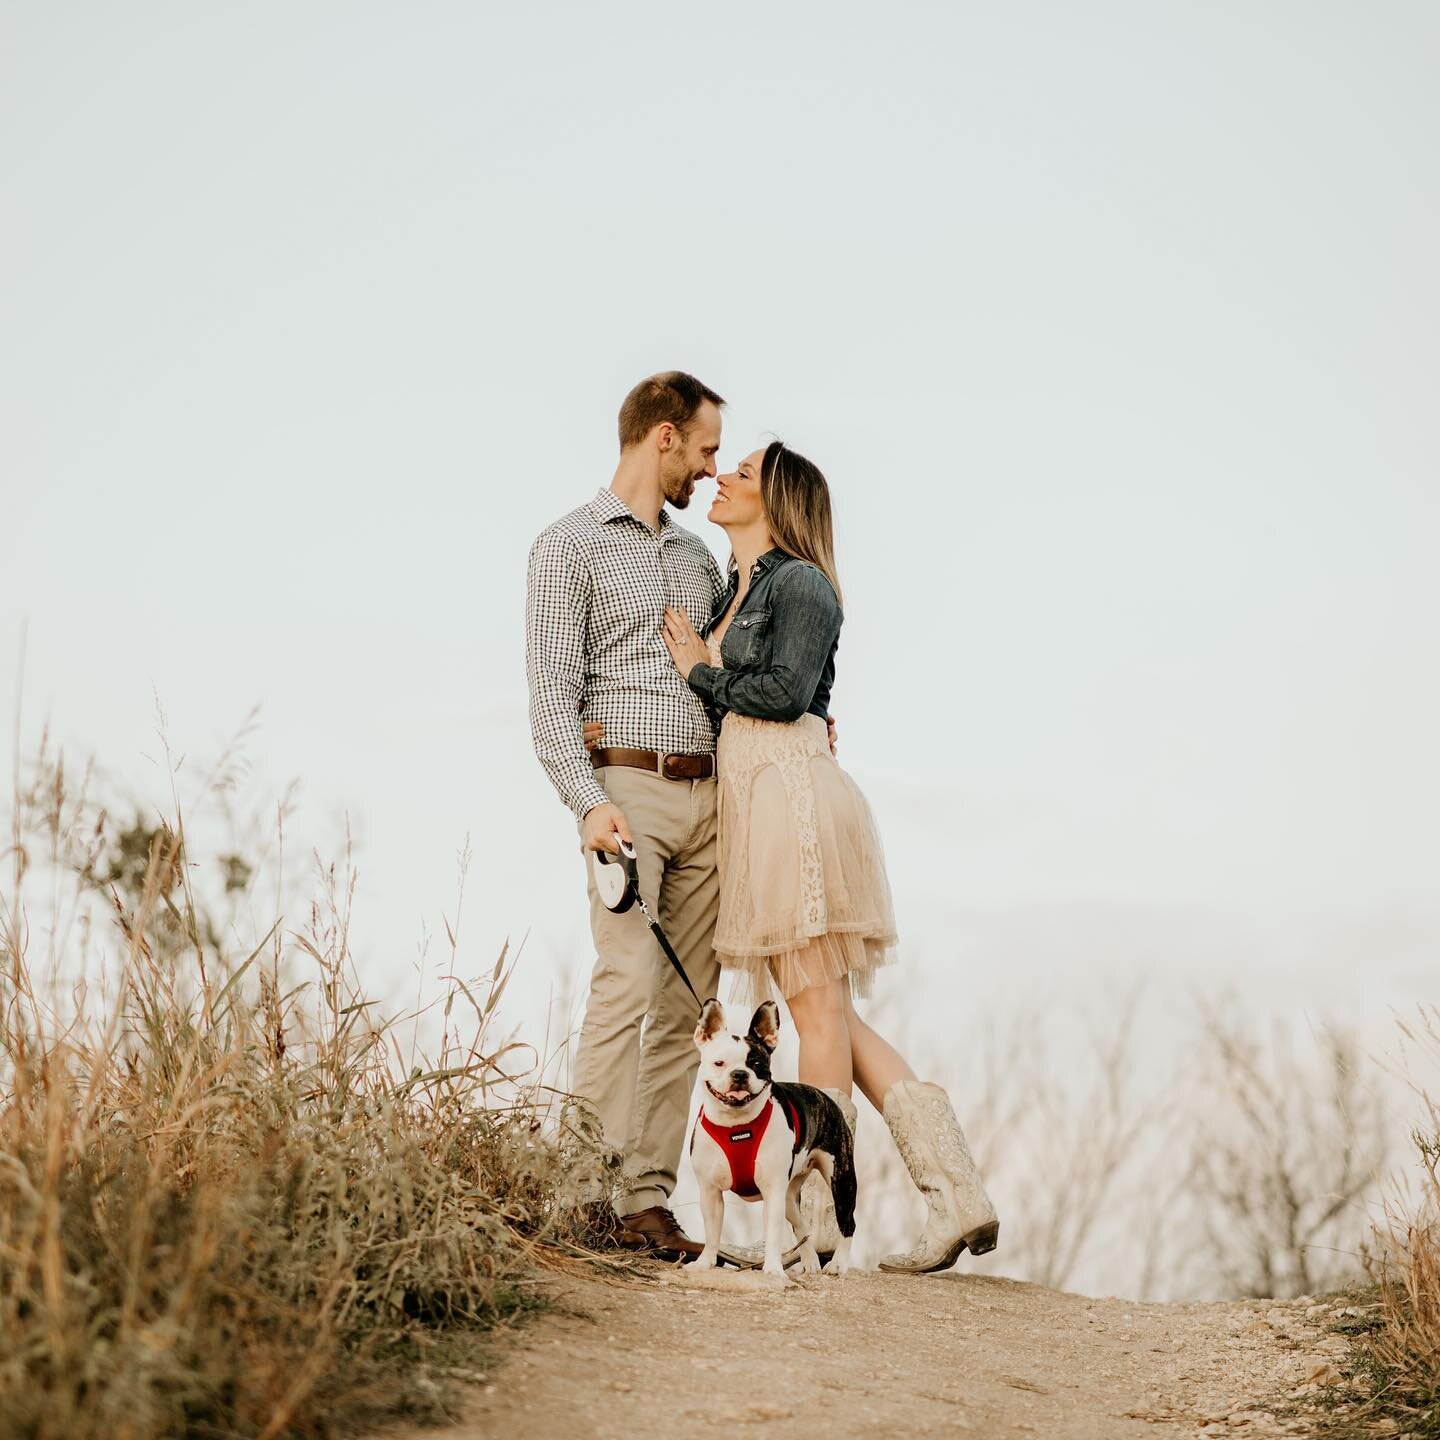 3 reasons you should bring your puppy to your session!⁣
⁣
1. They are family and such a part of your every day life.  So every family member should be included. ☺️⁣
⁣
2. They make you smile more genuinely for photos. You can&rsquo;t help but smile wh